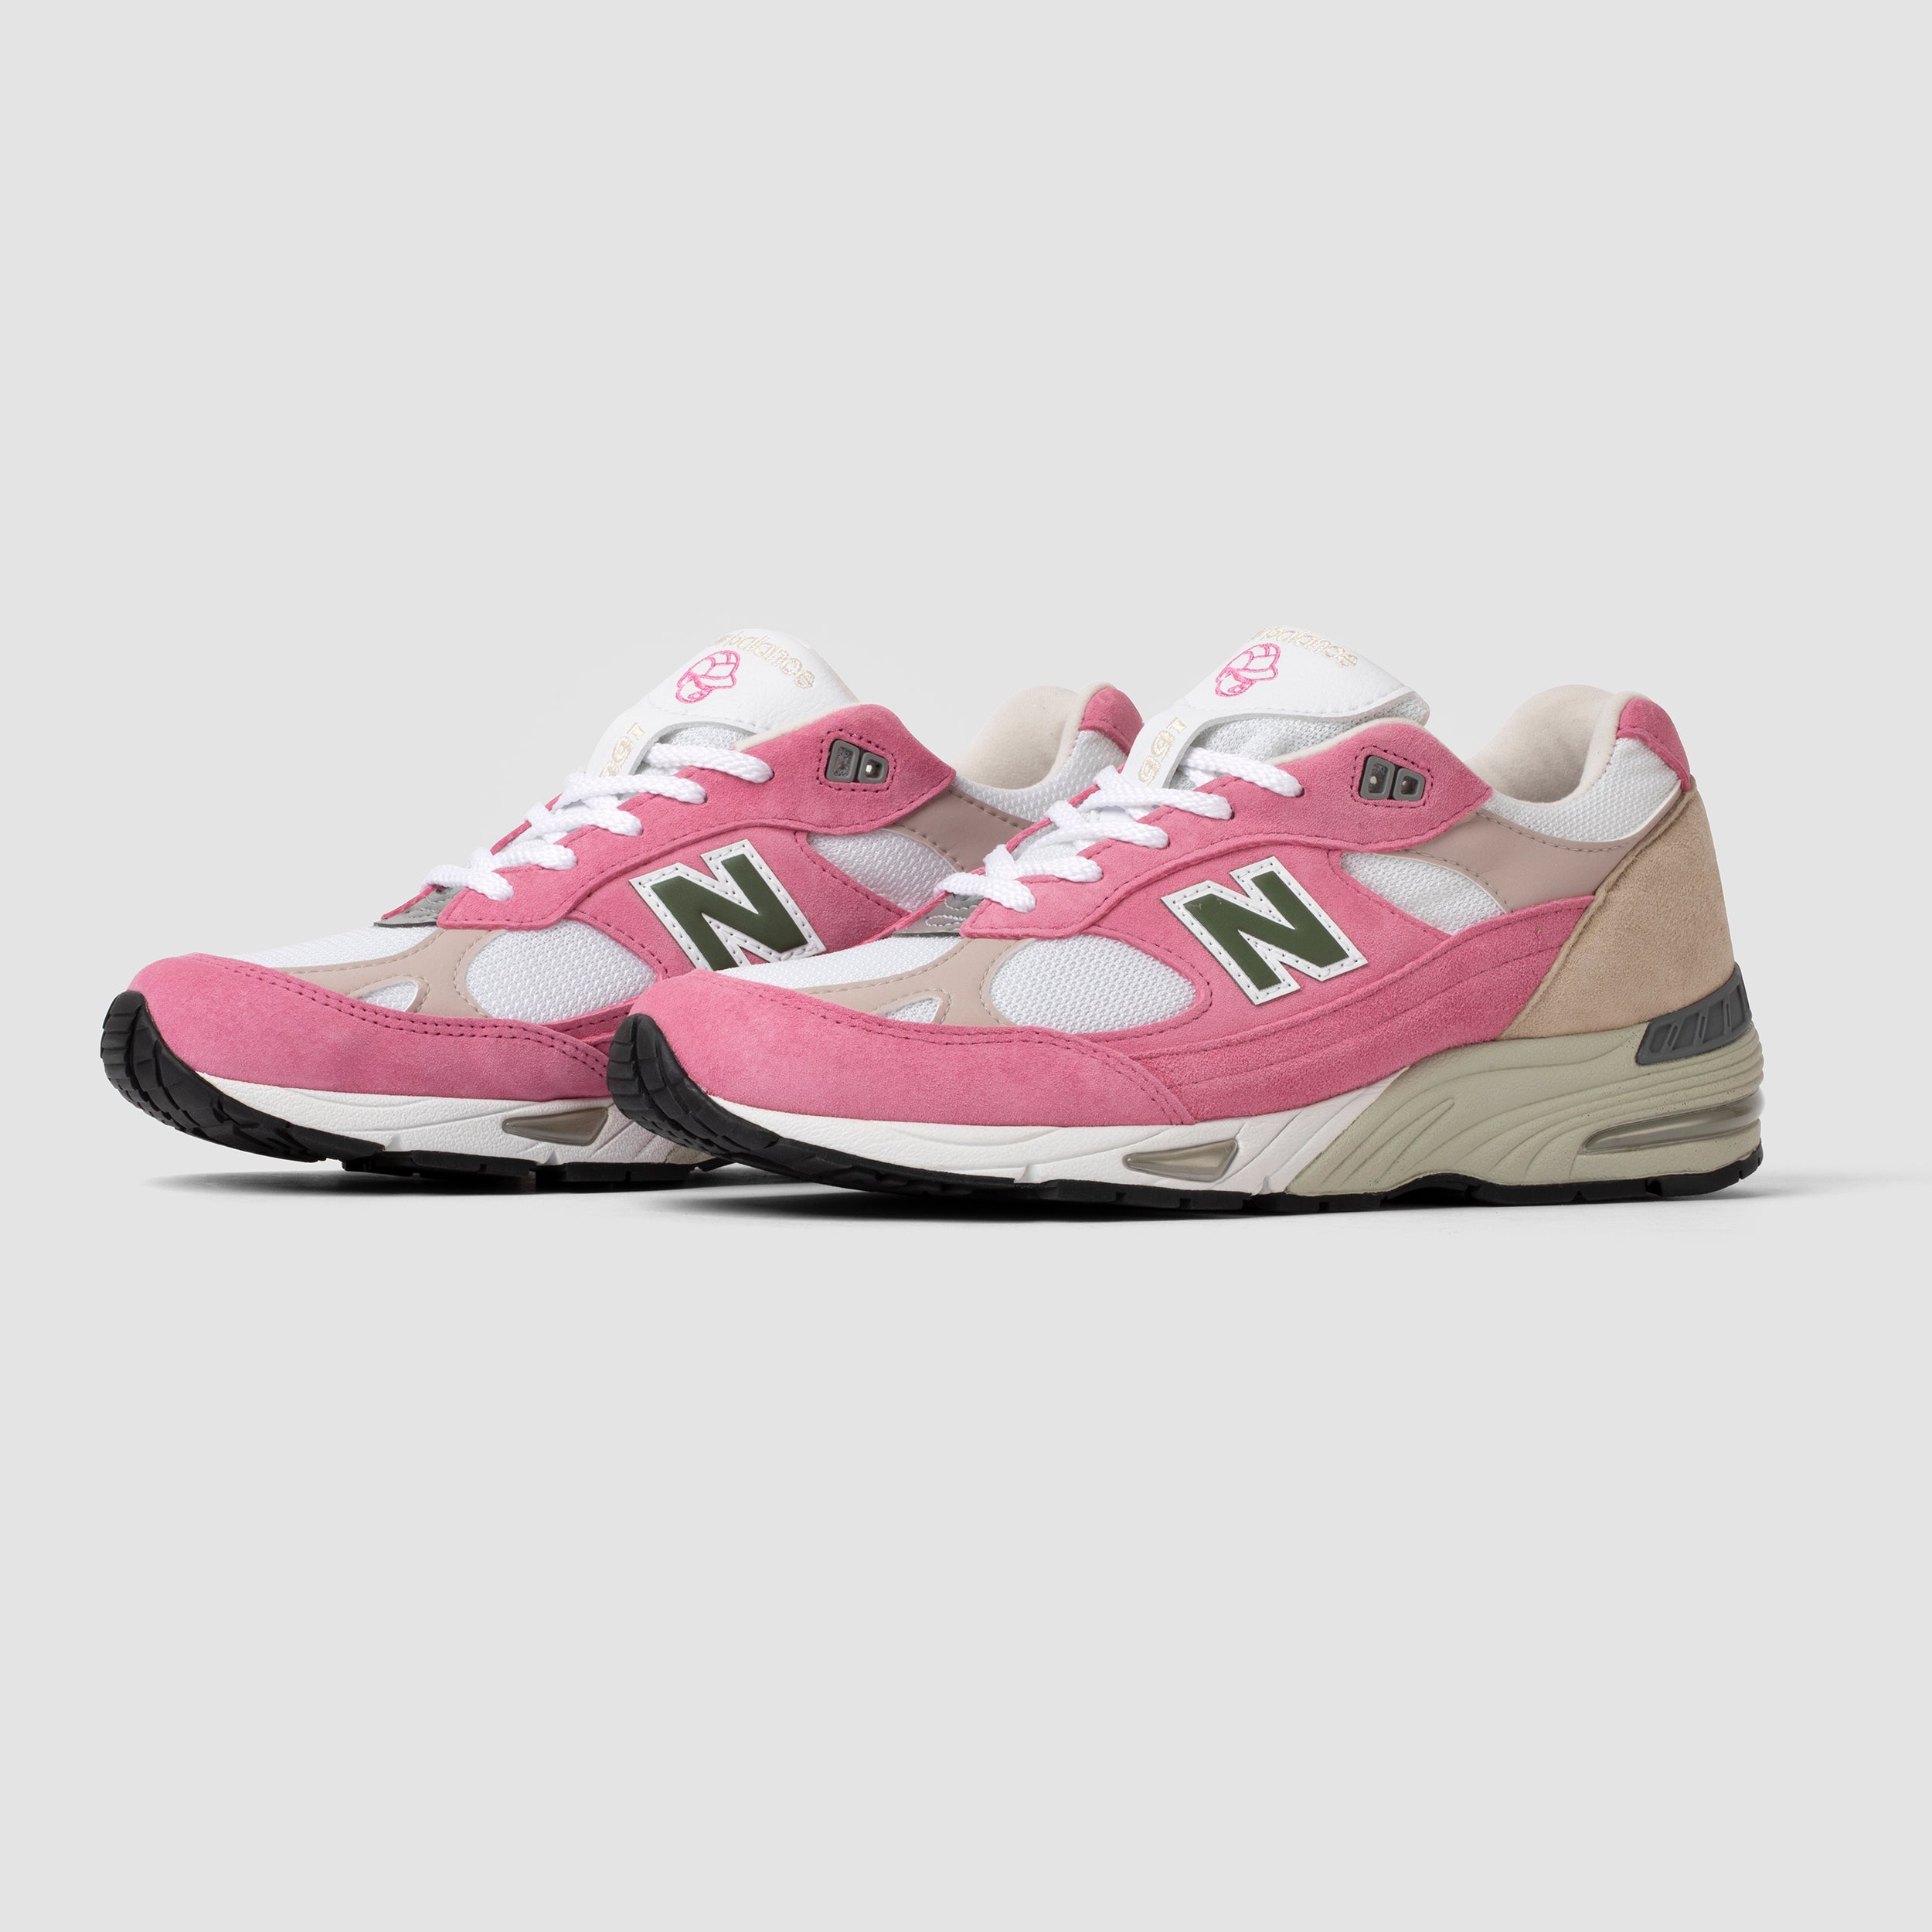 All Gone and Paperboy New Balance 991